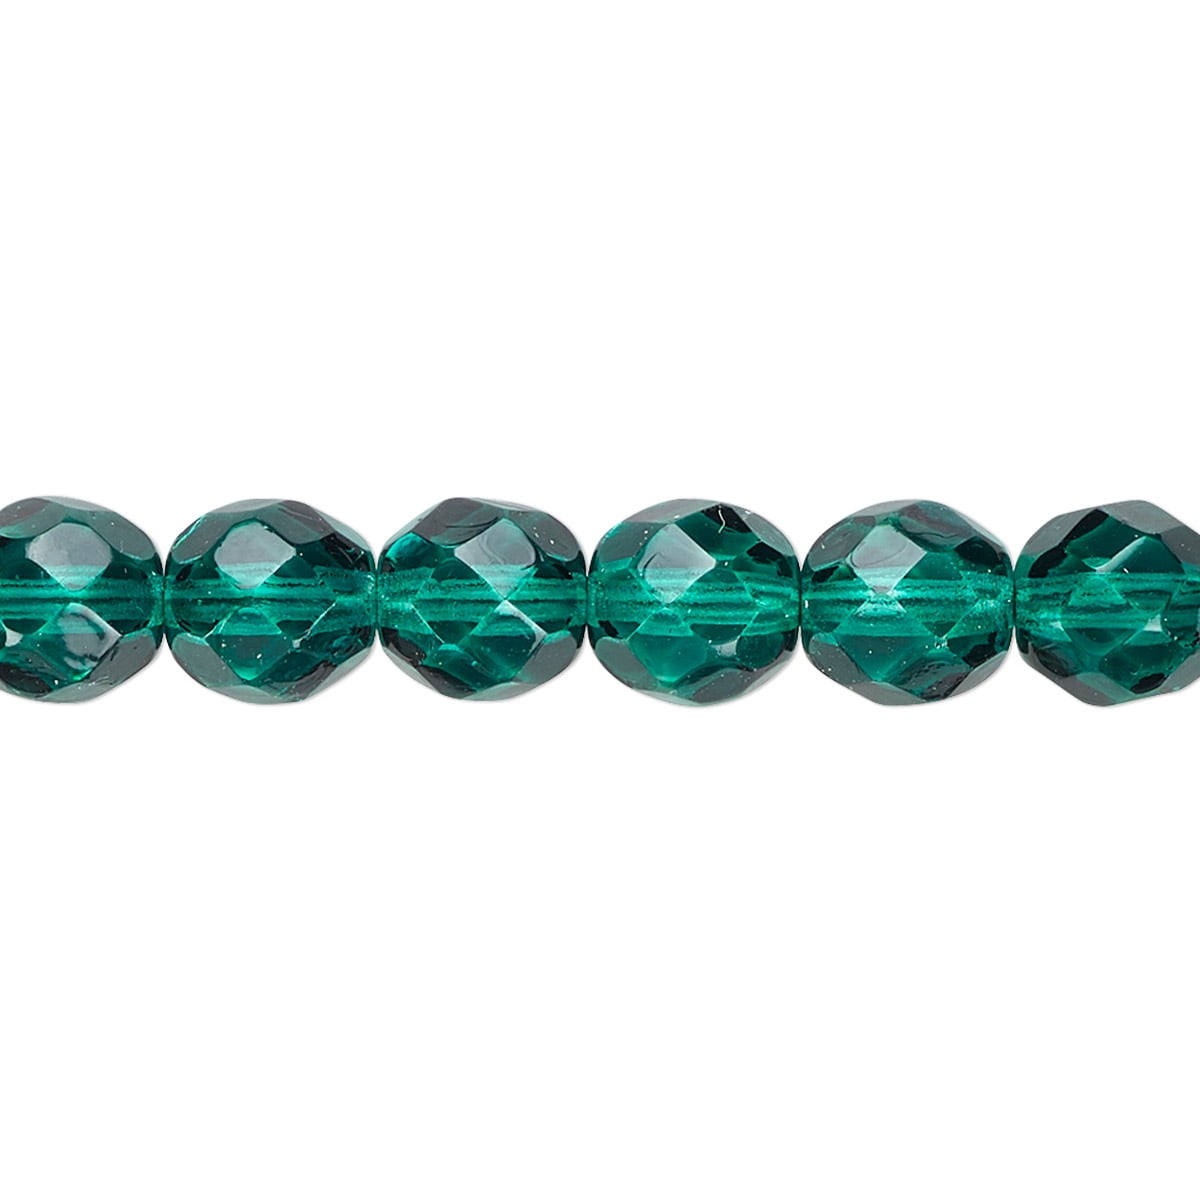 50 Dark Teal Czech Glass Round Fire Polished Faceted Beads 8MM 